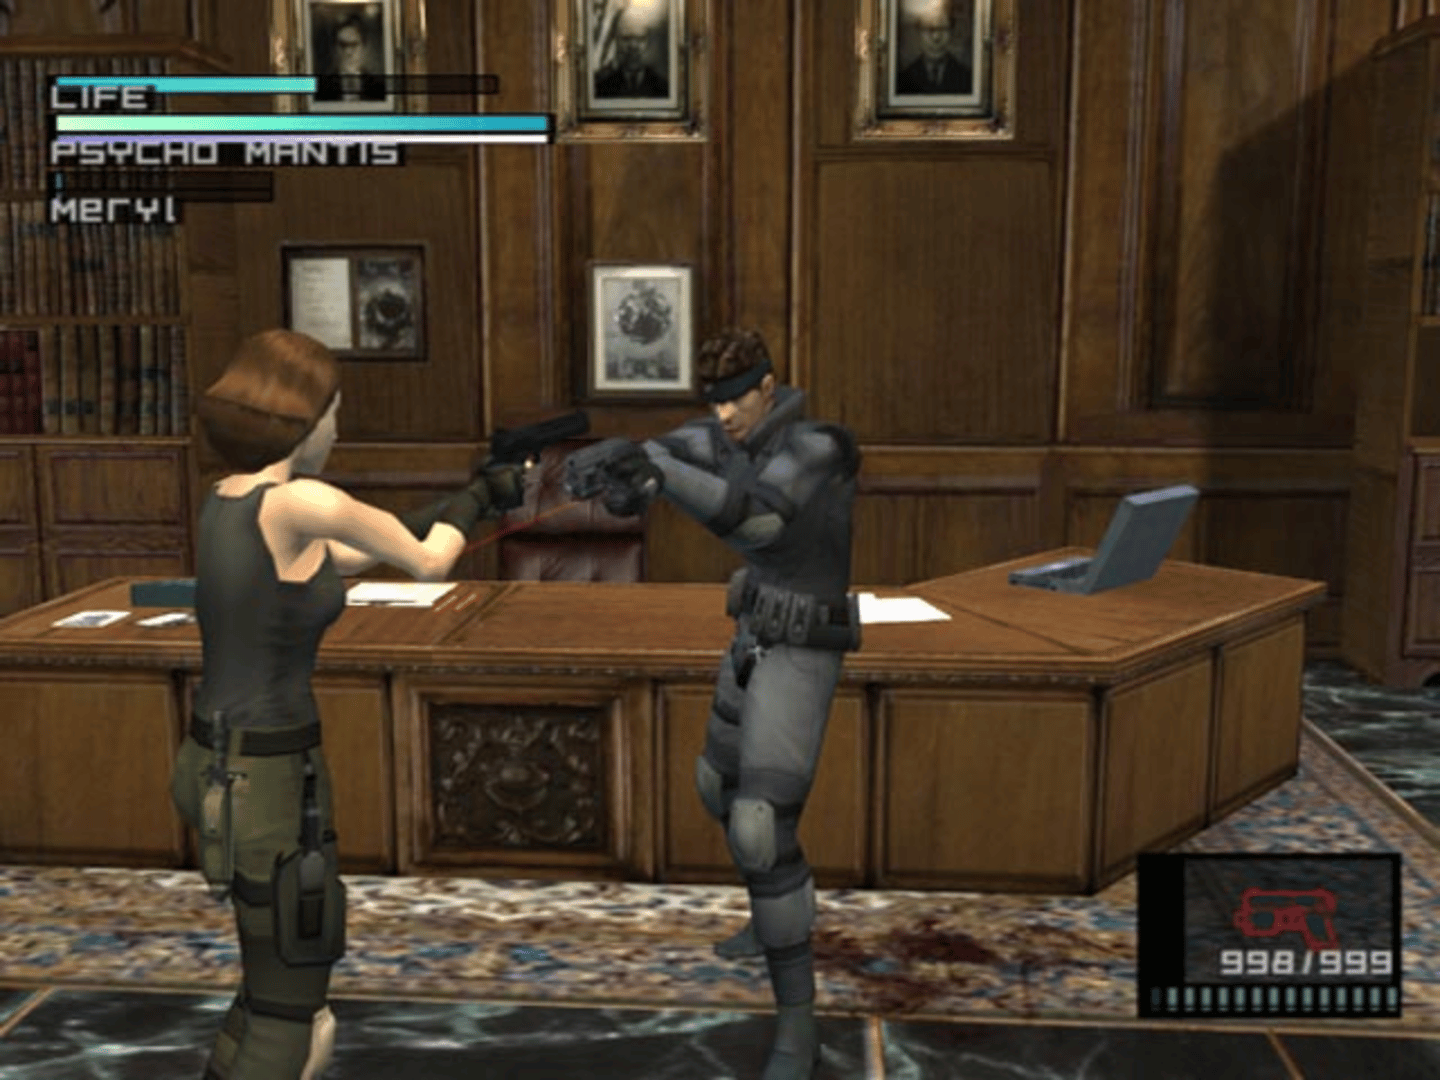 Metal Gear Solid: The Twin Snakes screenshot